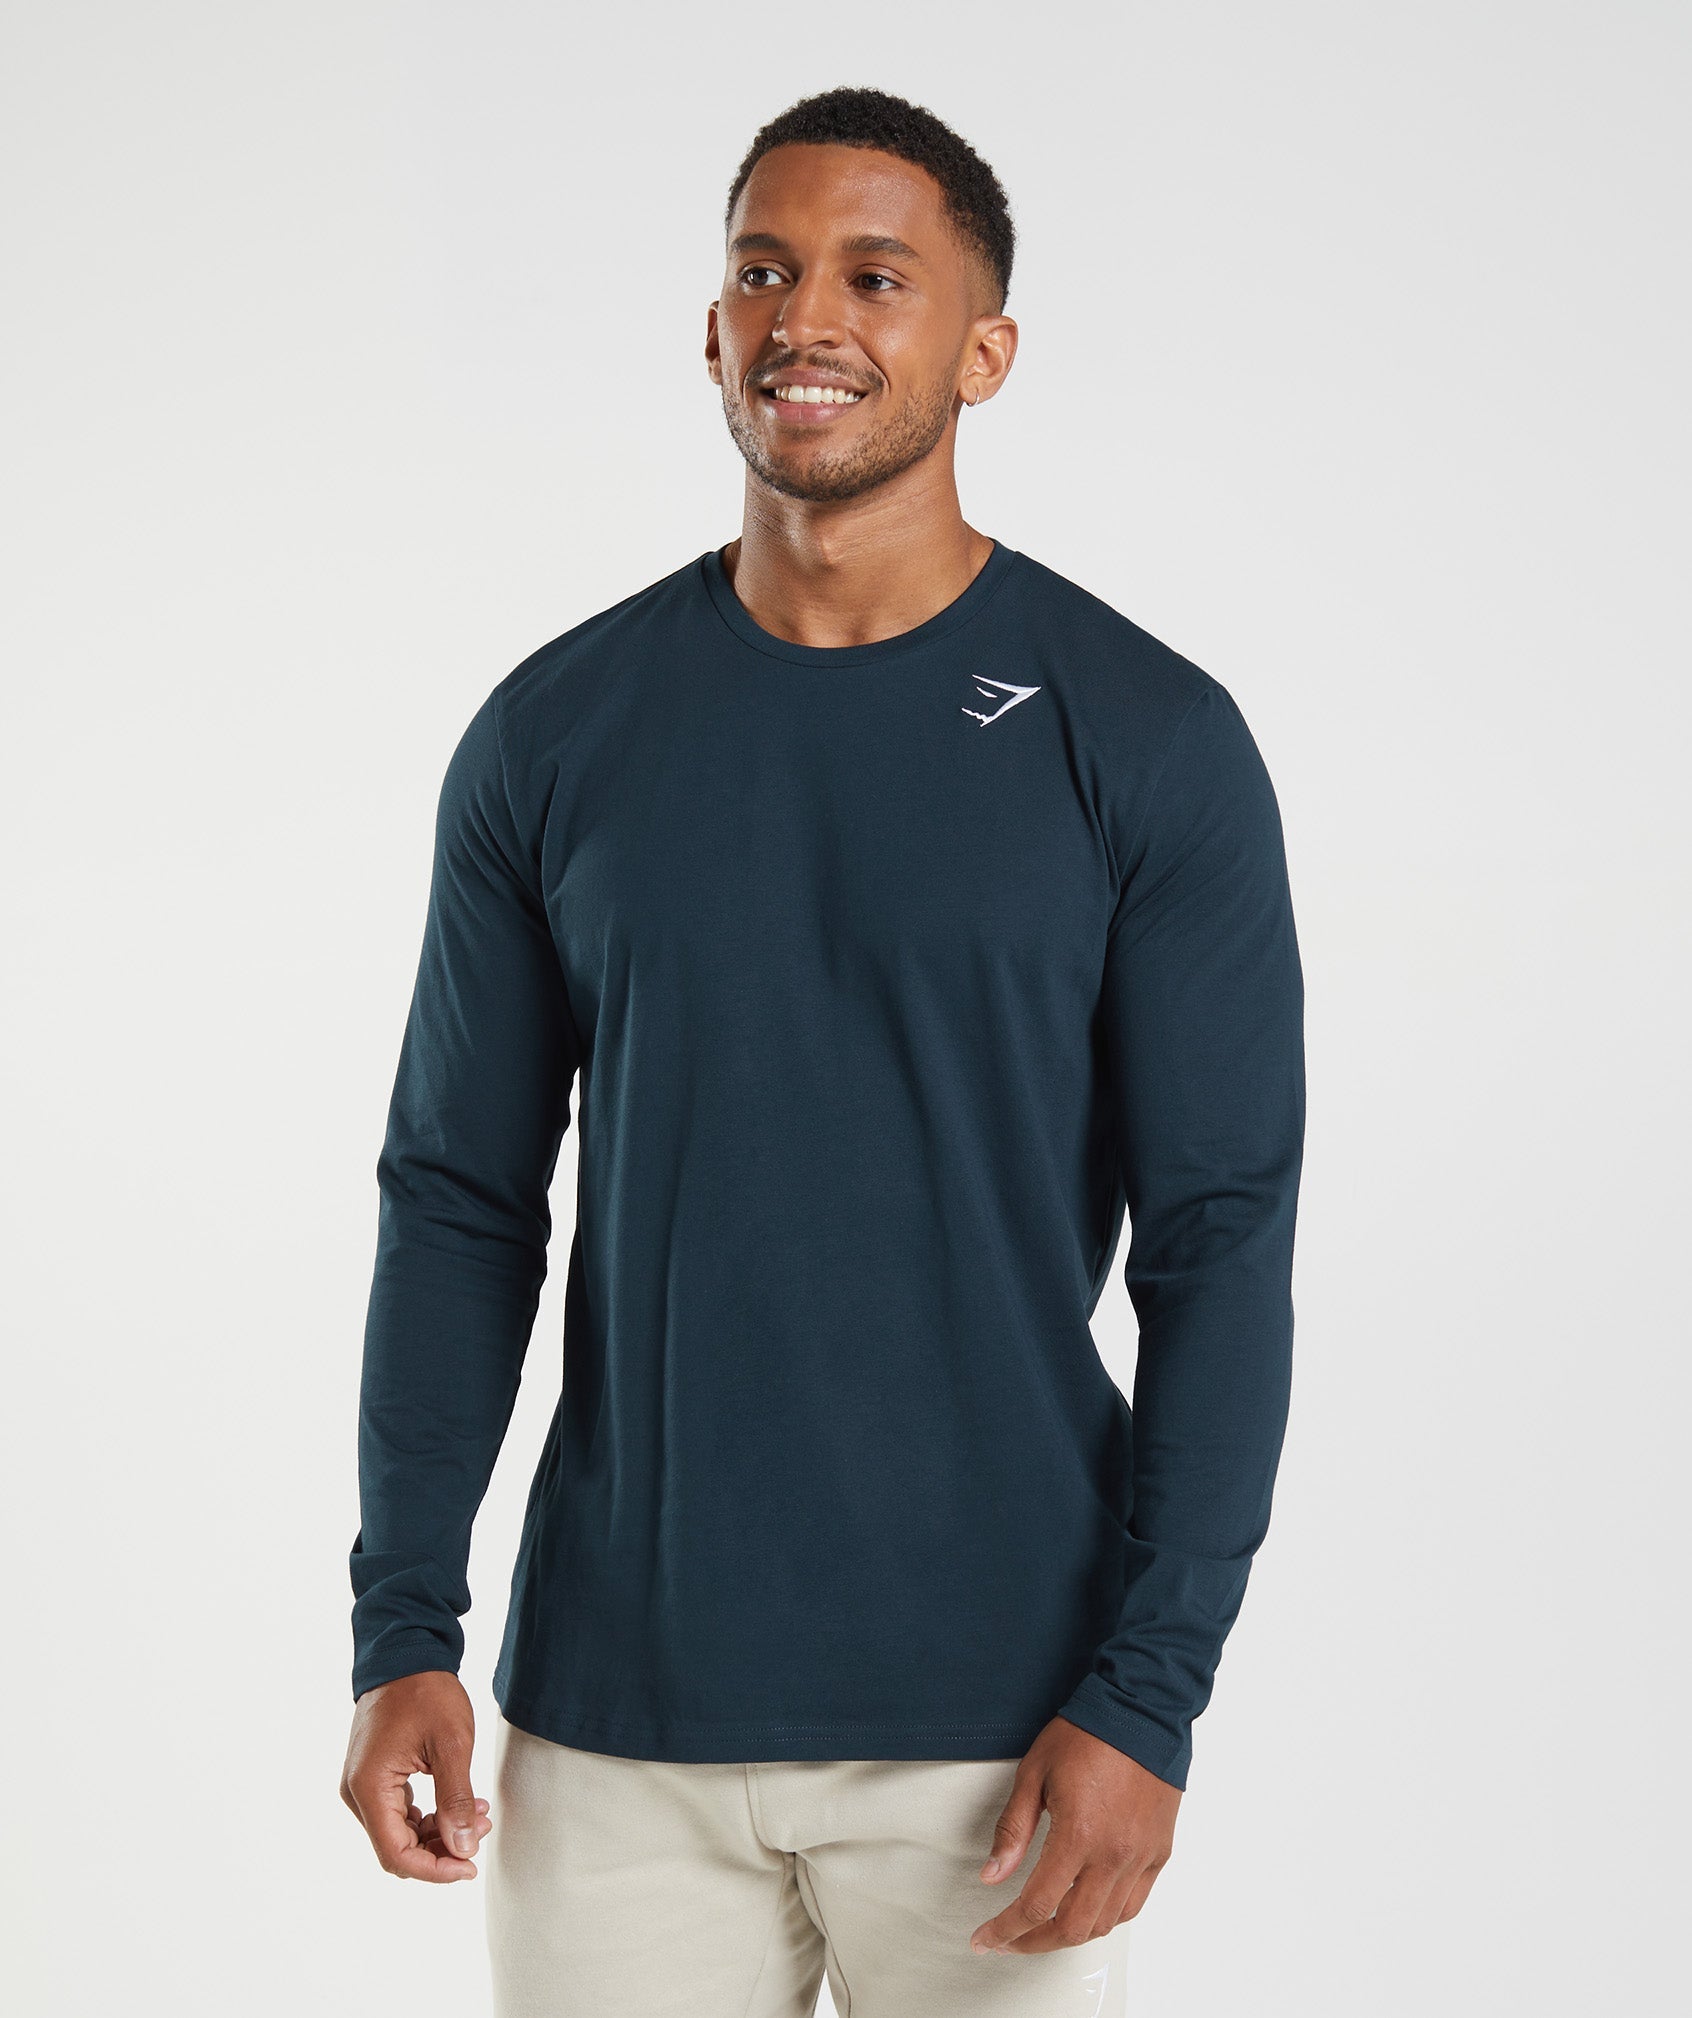 Buy Kamo Fitness Long Sleeve Activewear T-Shirt for Men with Fast